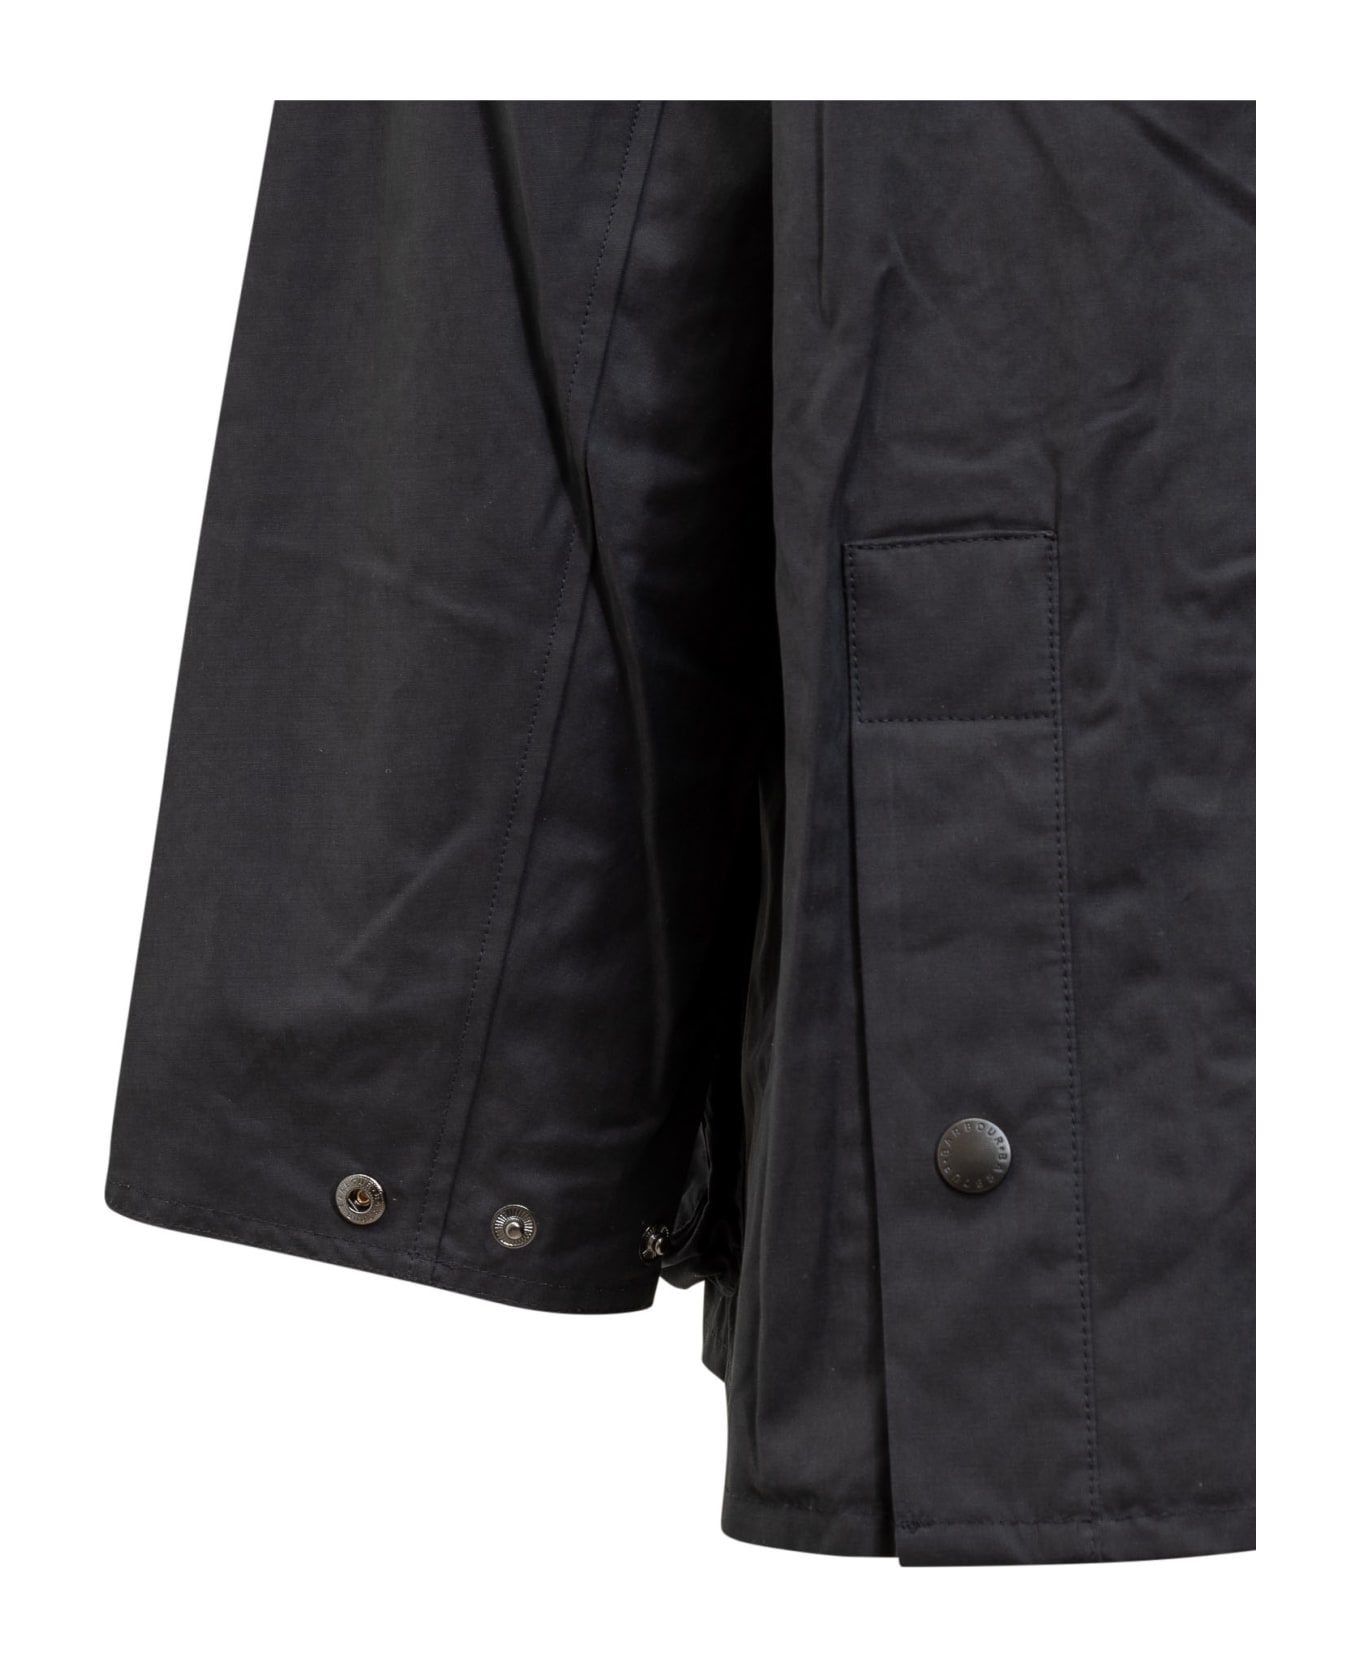 Barbour Peached Jacket - NAVY